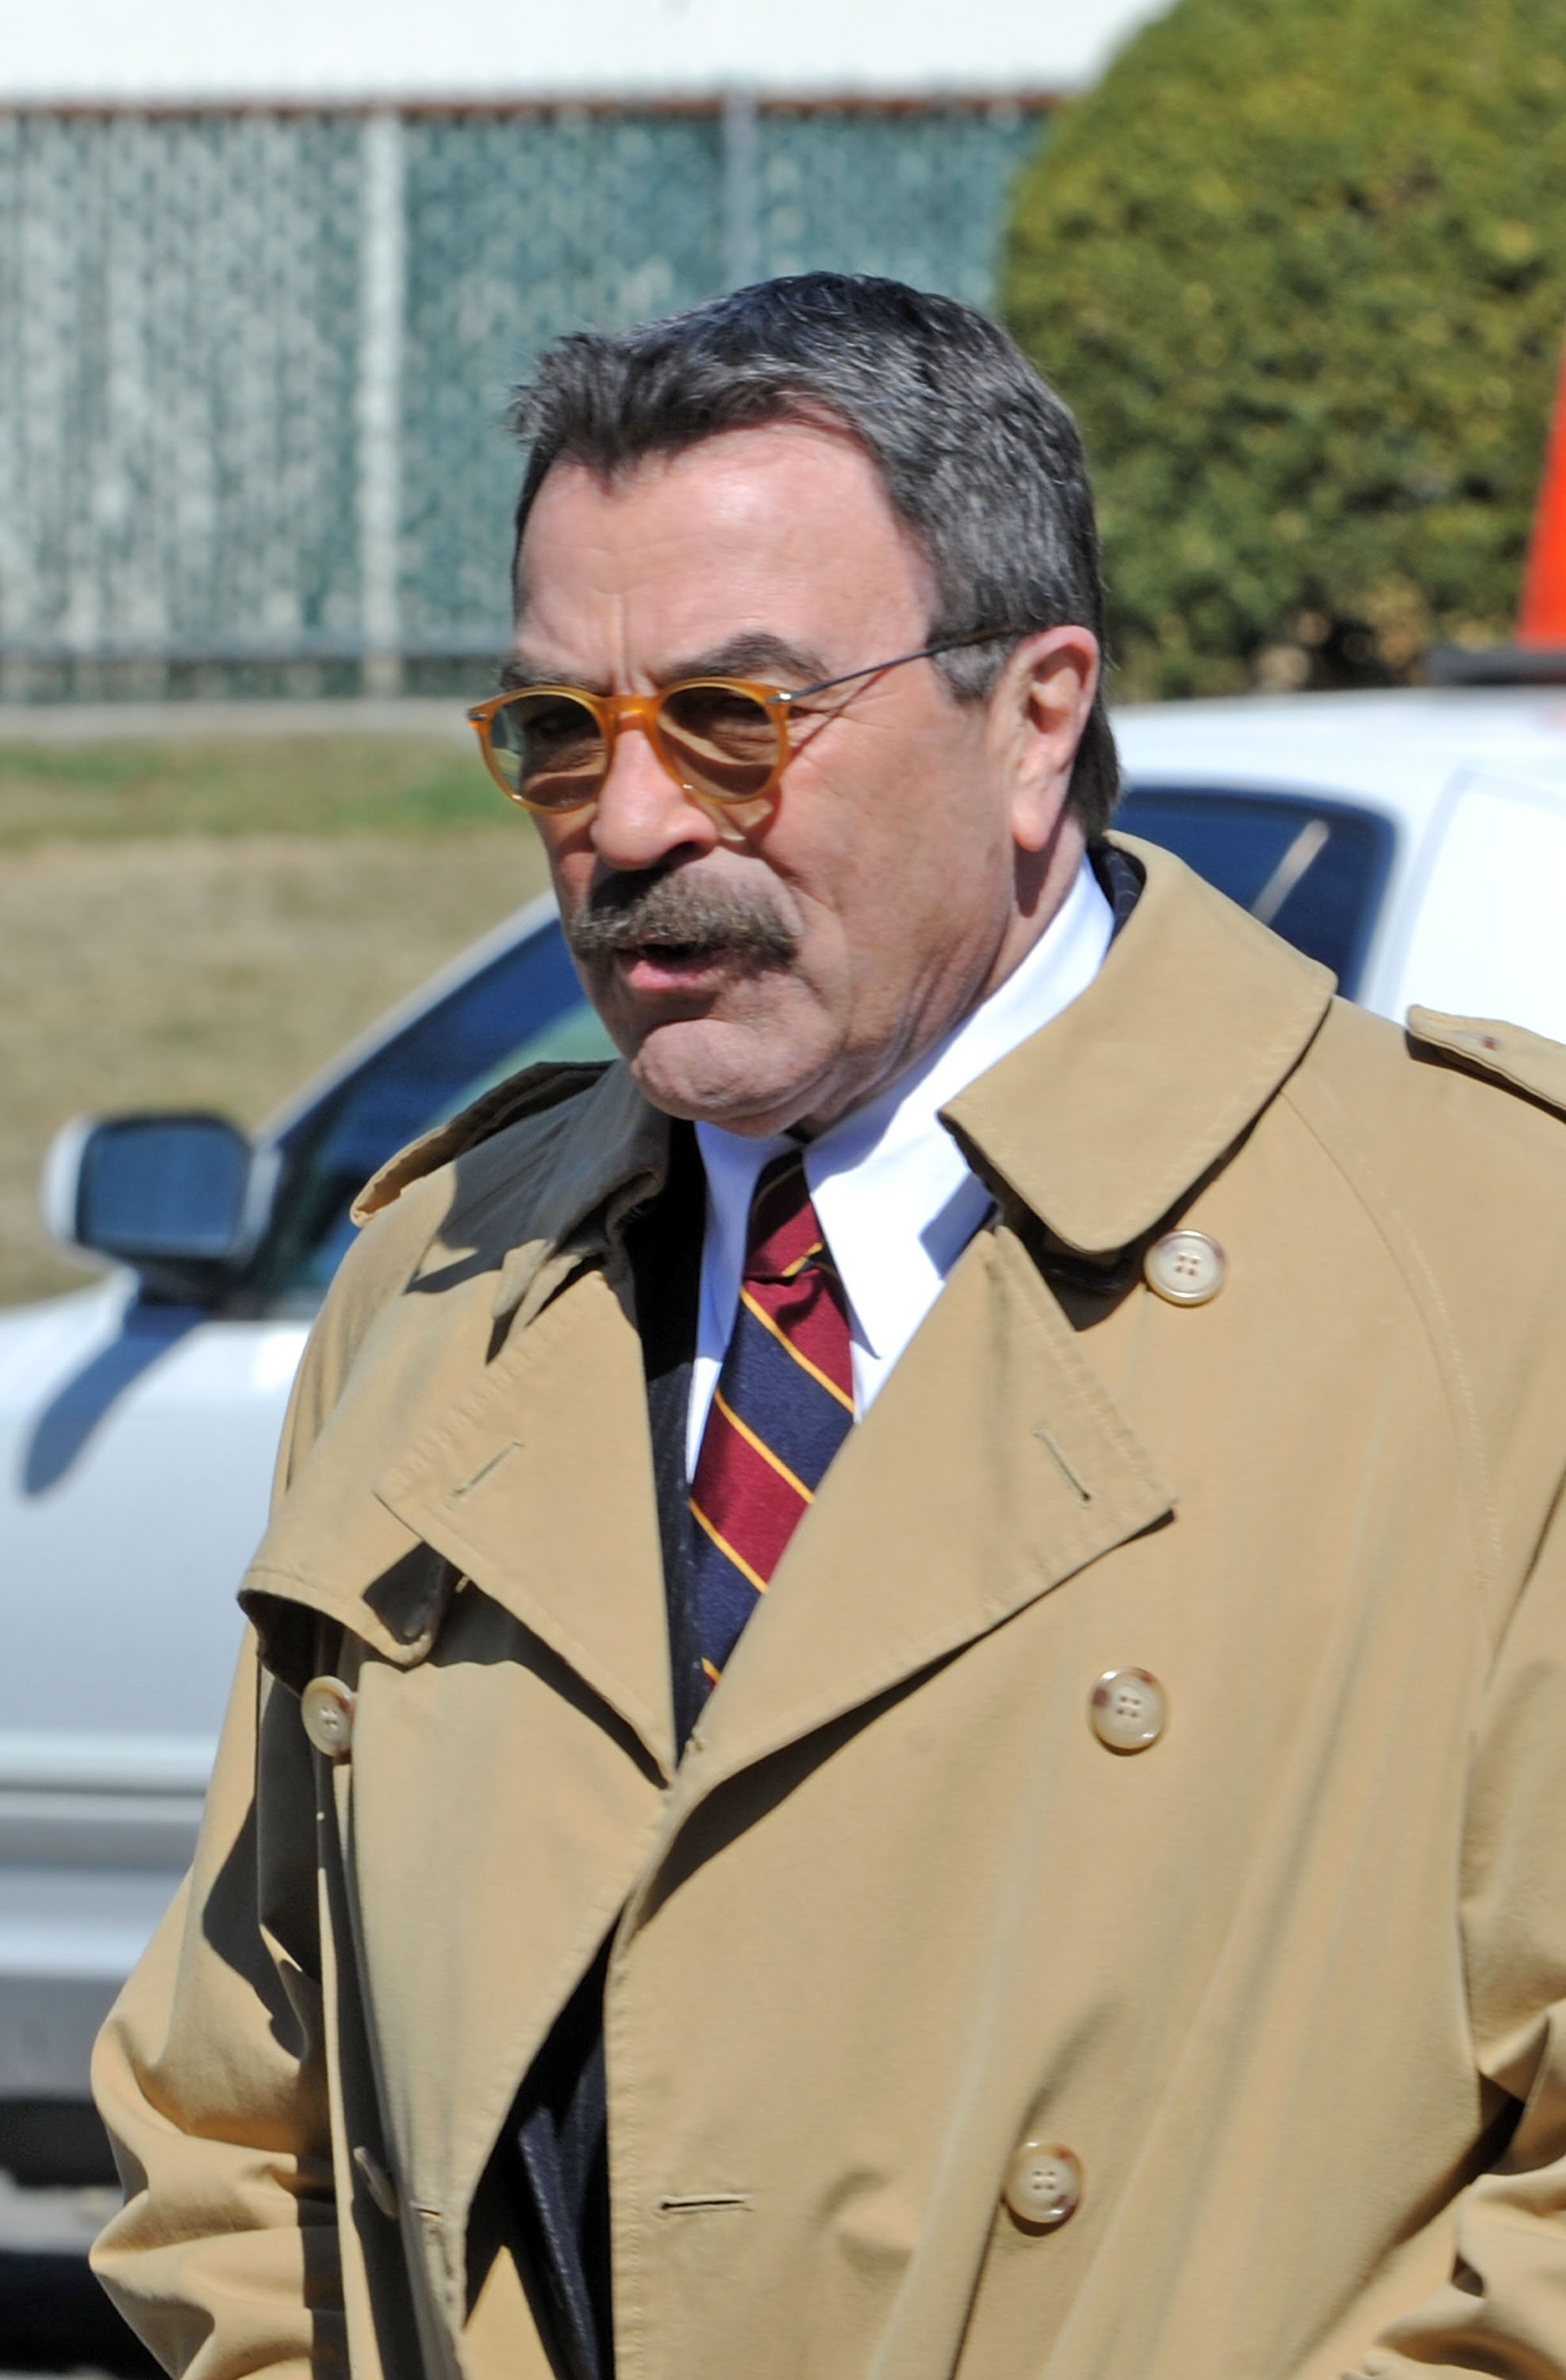  Actor Tom Selleck on the set of "Blue Bloods" on March 21, 2014 in New York City. | Source: Getty Images